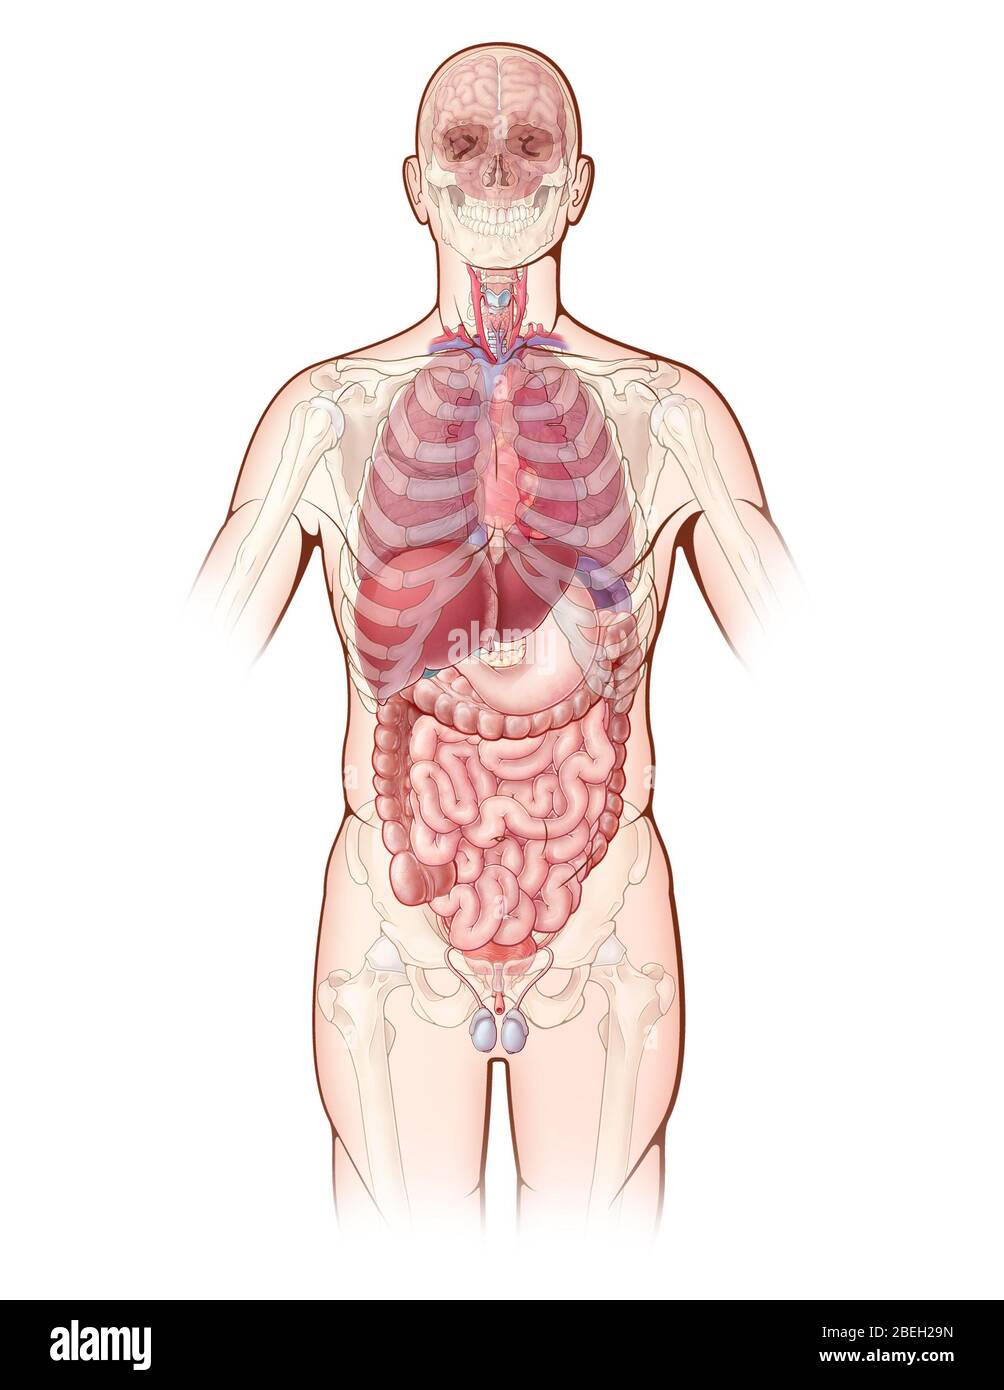 An illustration depicting the major organs in the human body, as well as a ghosted view of the bones of the skeleton. Stock Photo